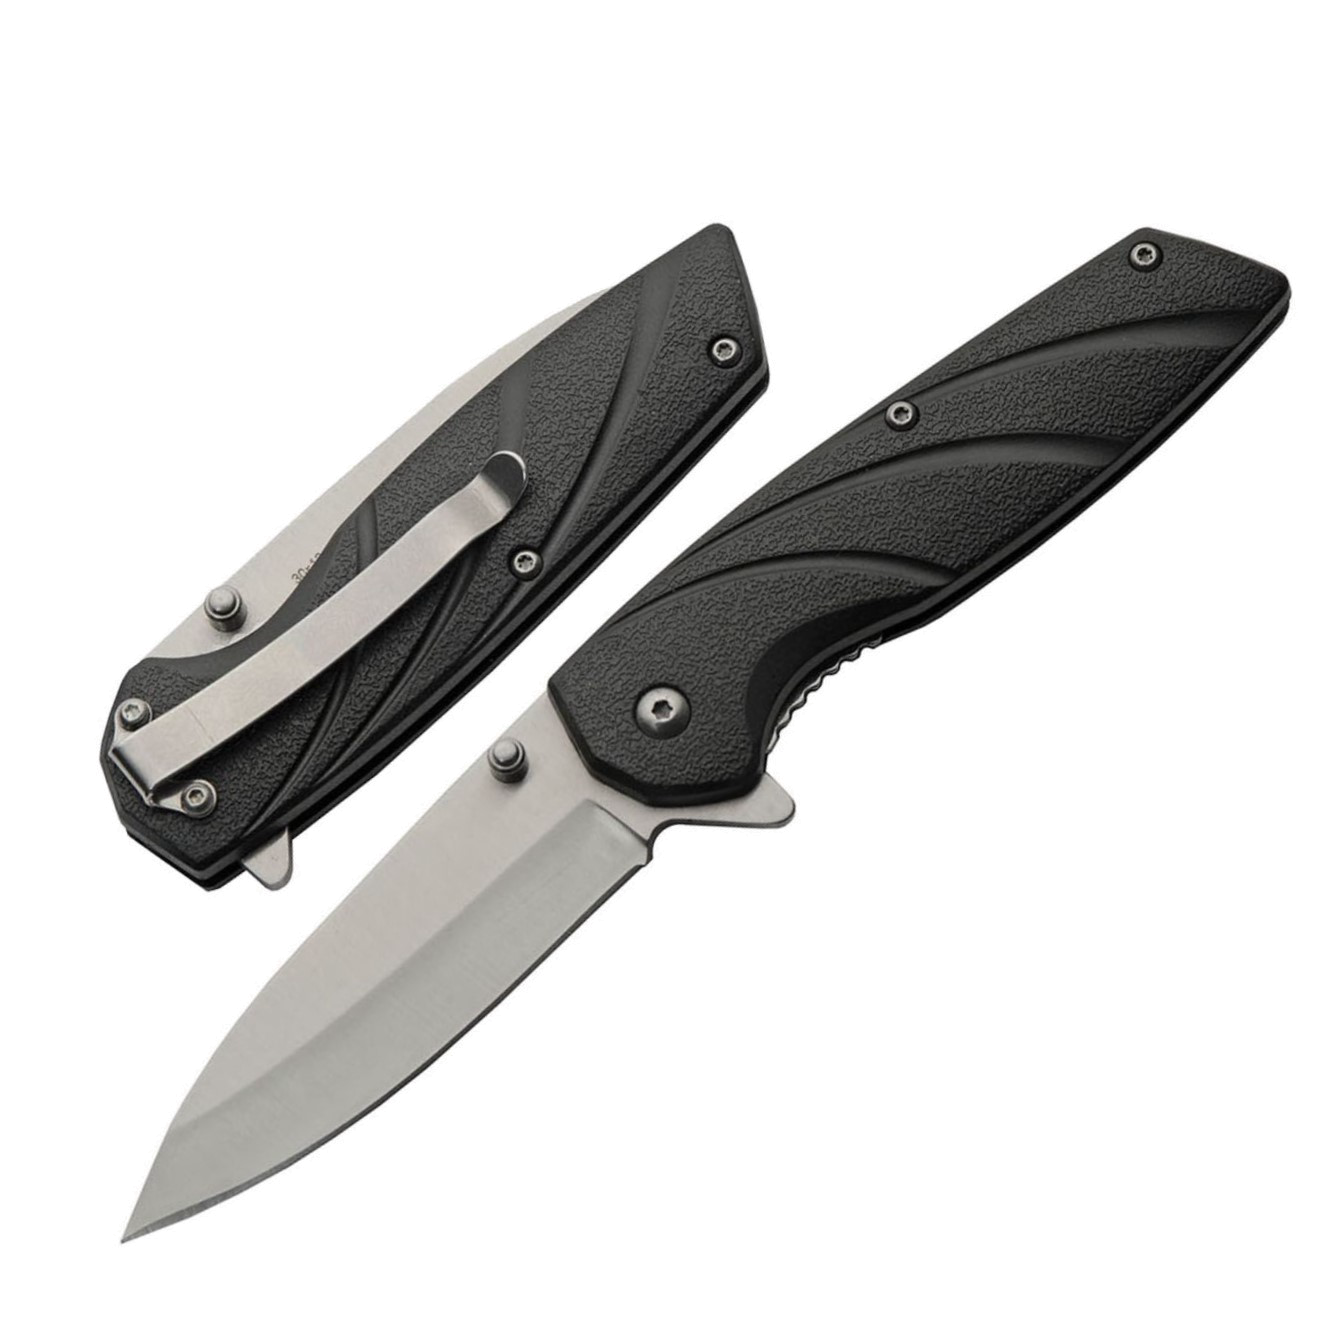 product image for Pocket Knife Compact Spring Assist 3 25 Blade ABS Handle Satin Finish Clip